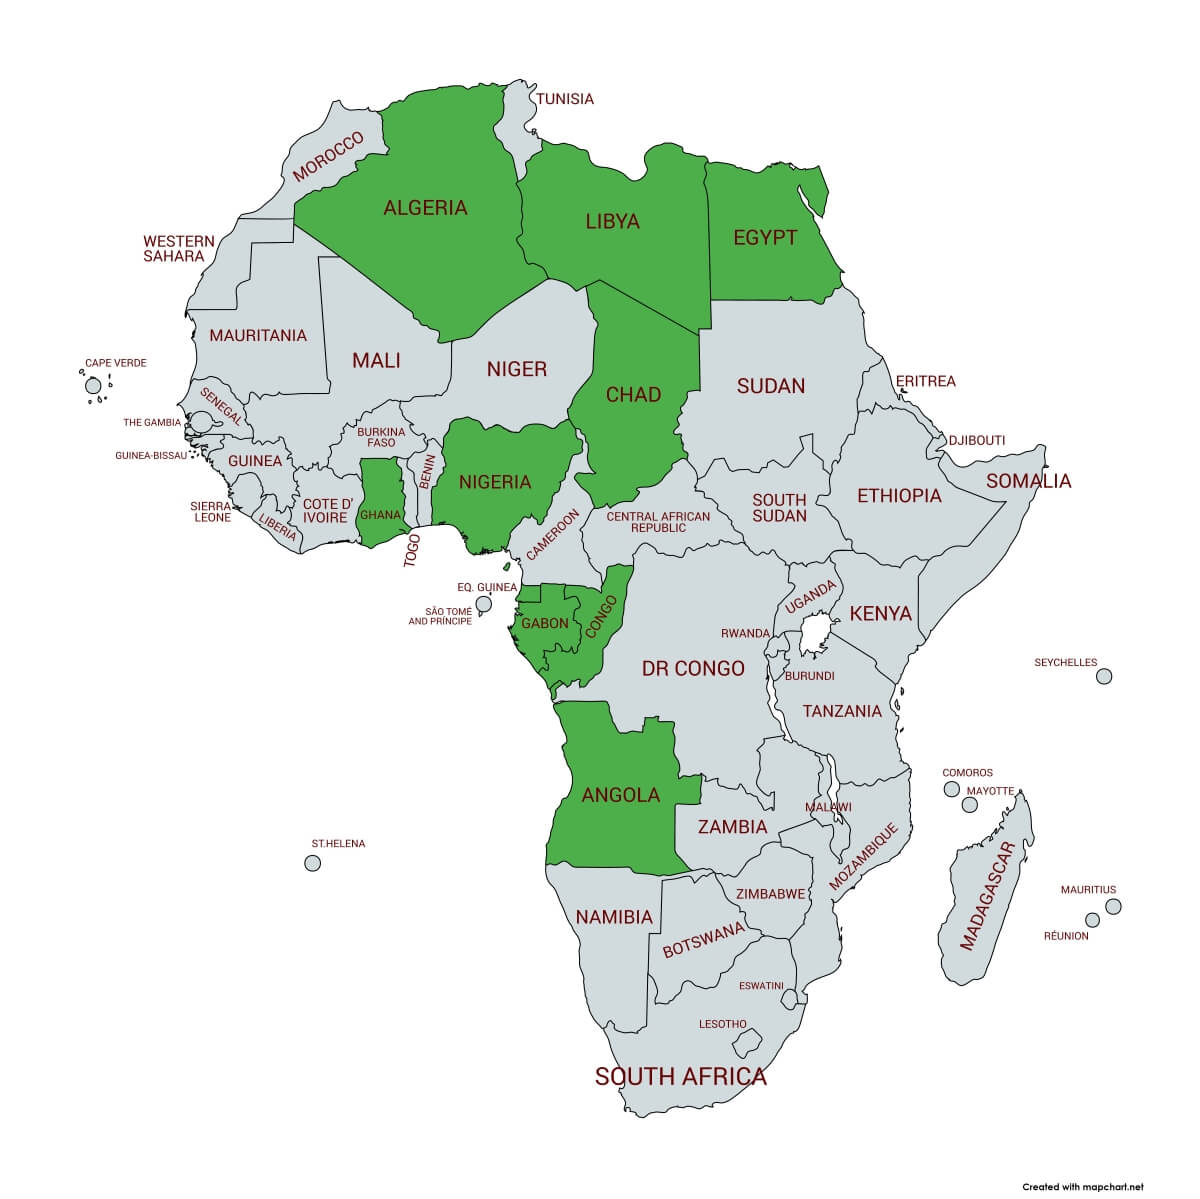 Invest in Oil Companies in Africa, find African Oil Company Opportunities